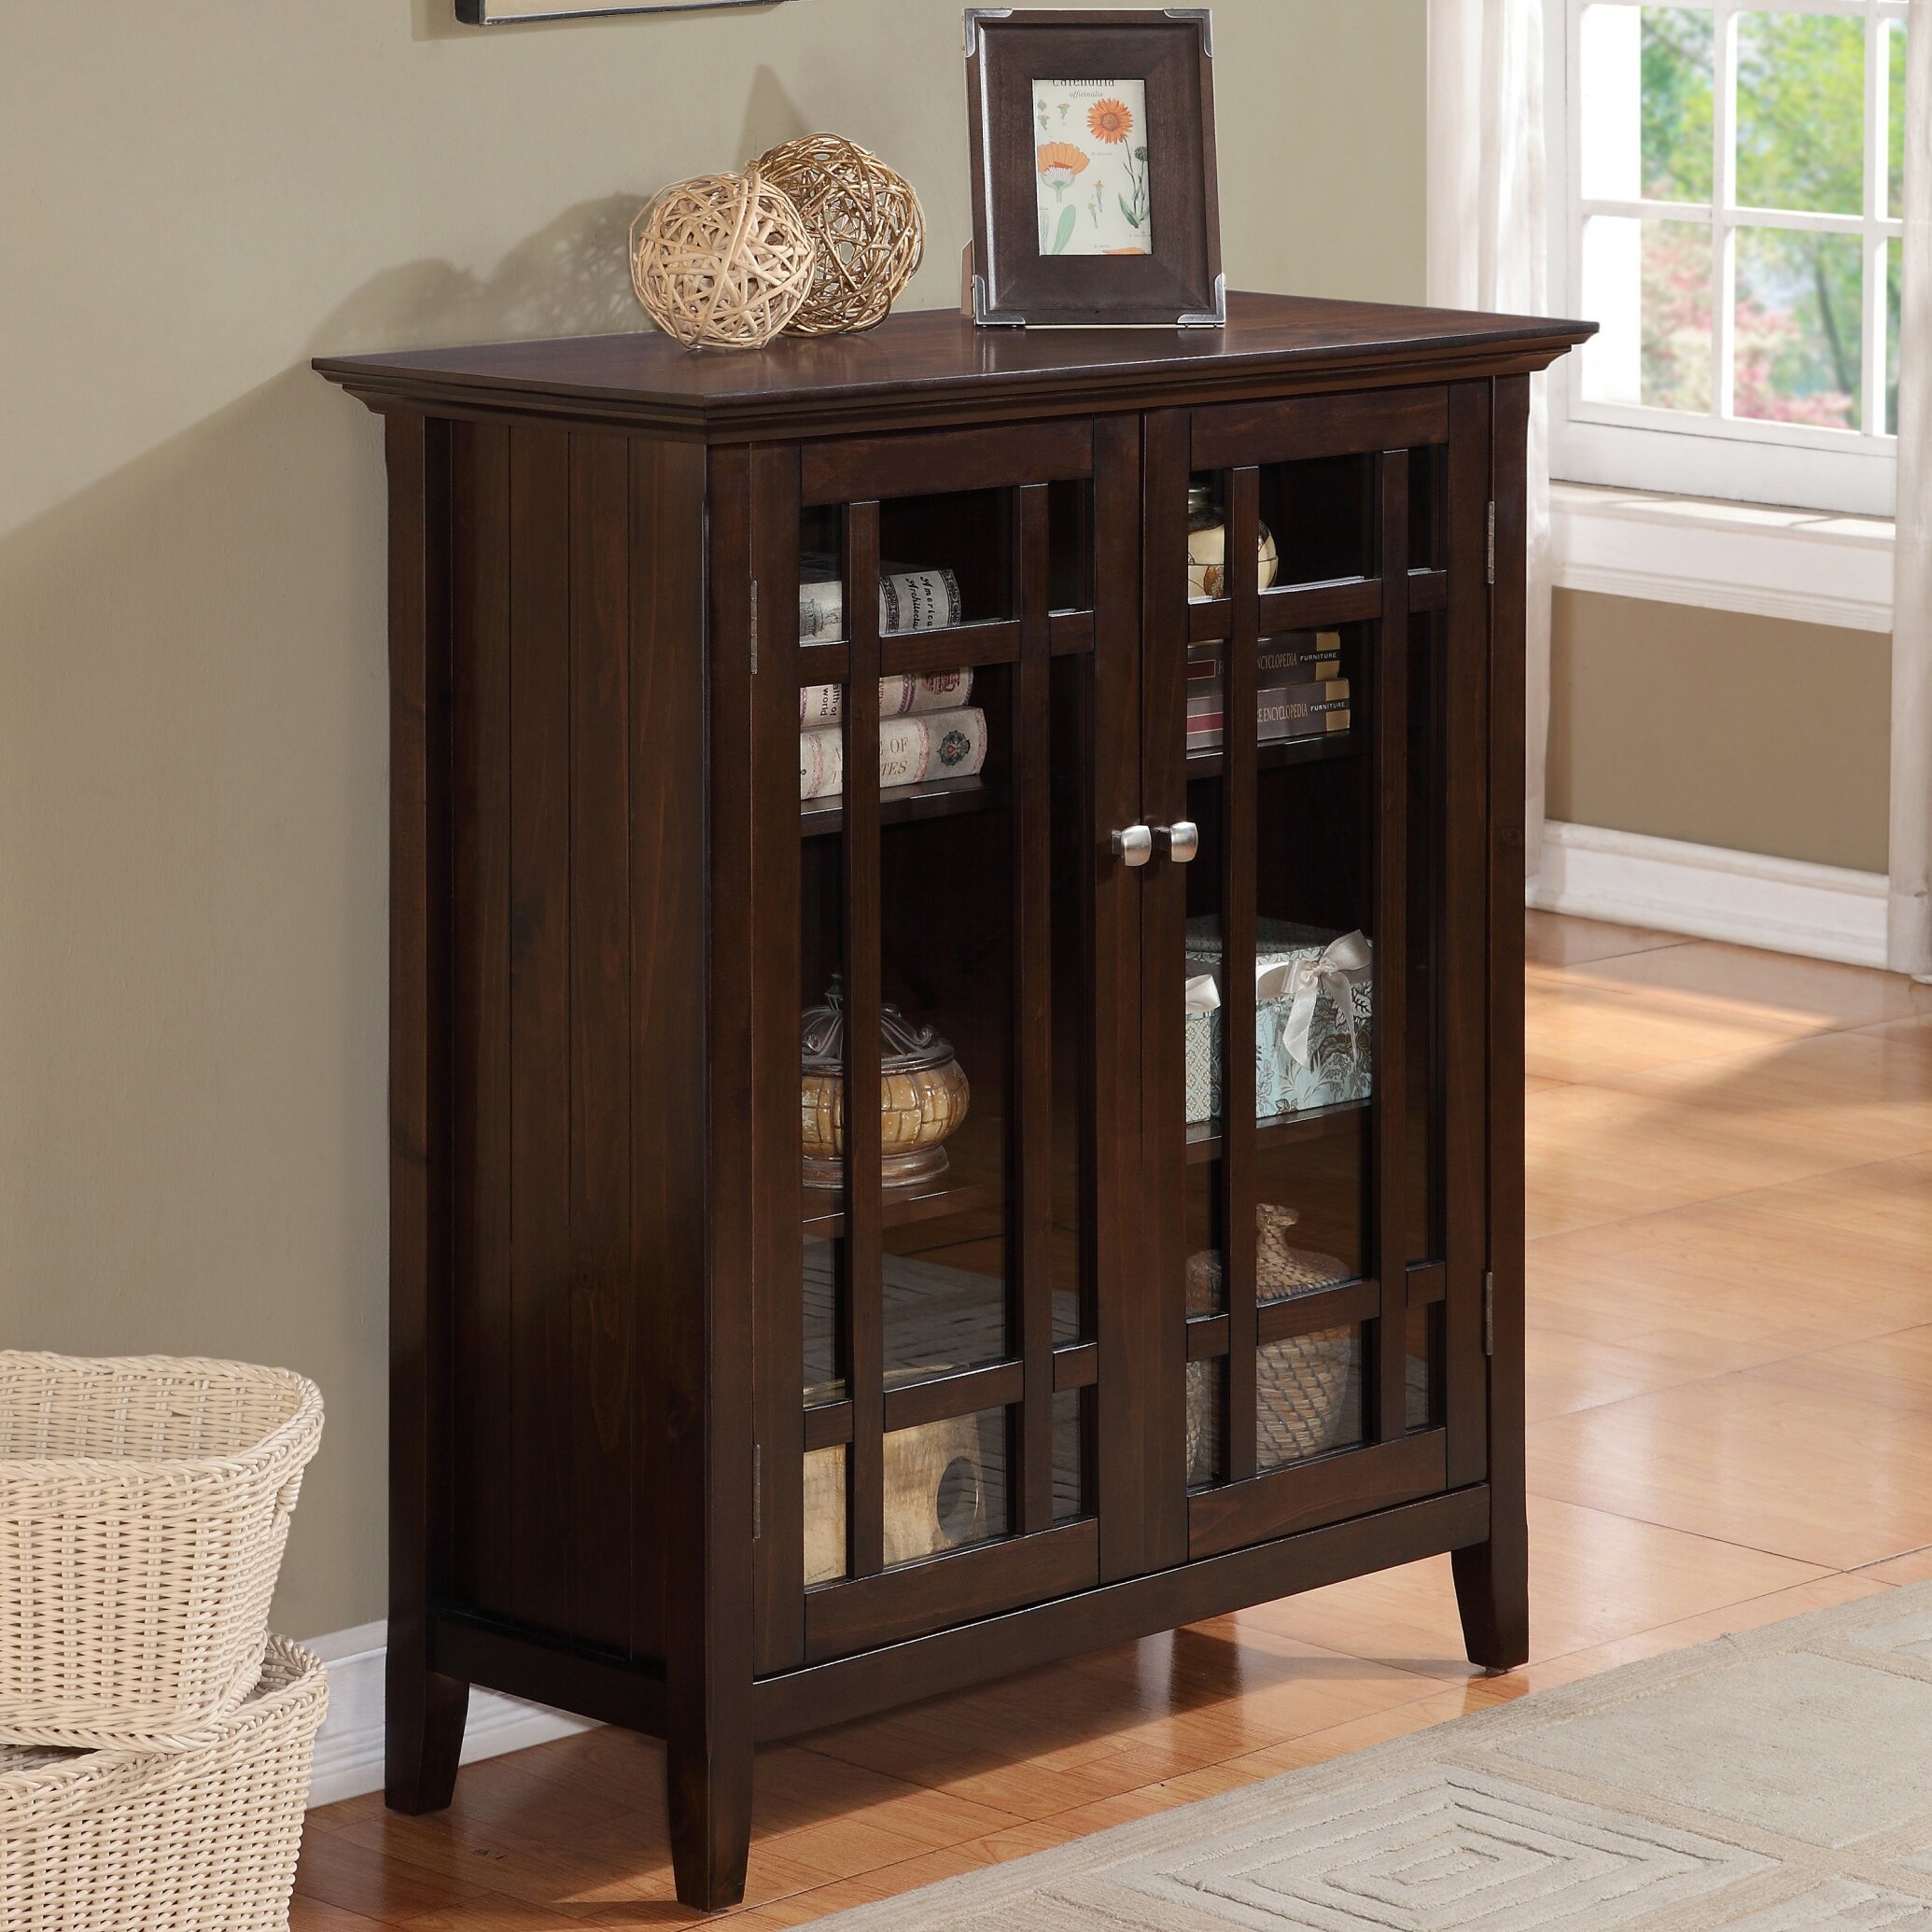 Darby Home Co Leon Media Cabinet with Buffet